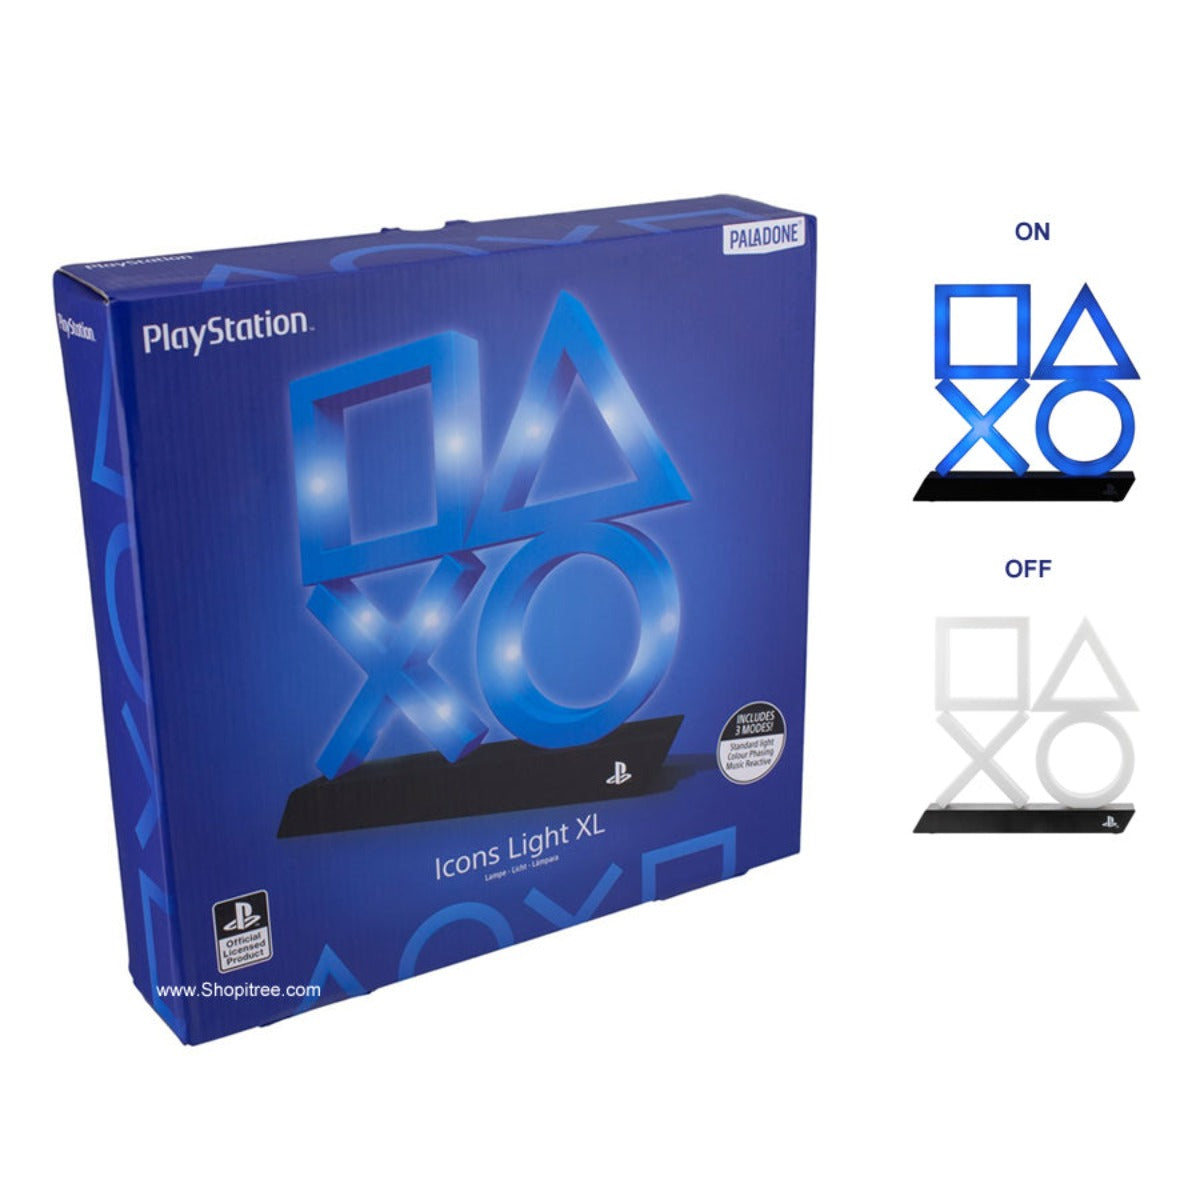 Playstation Icons Light XL (White)